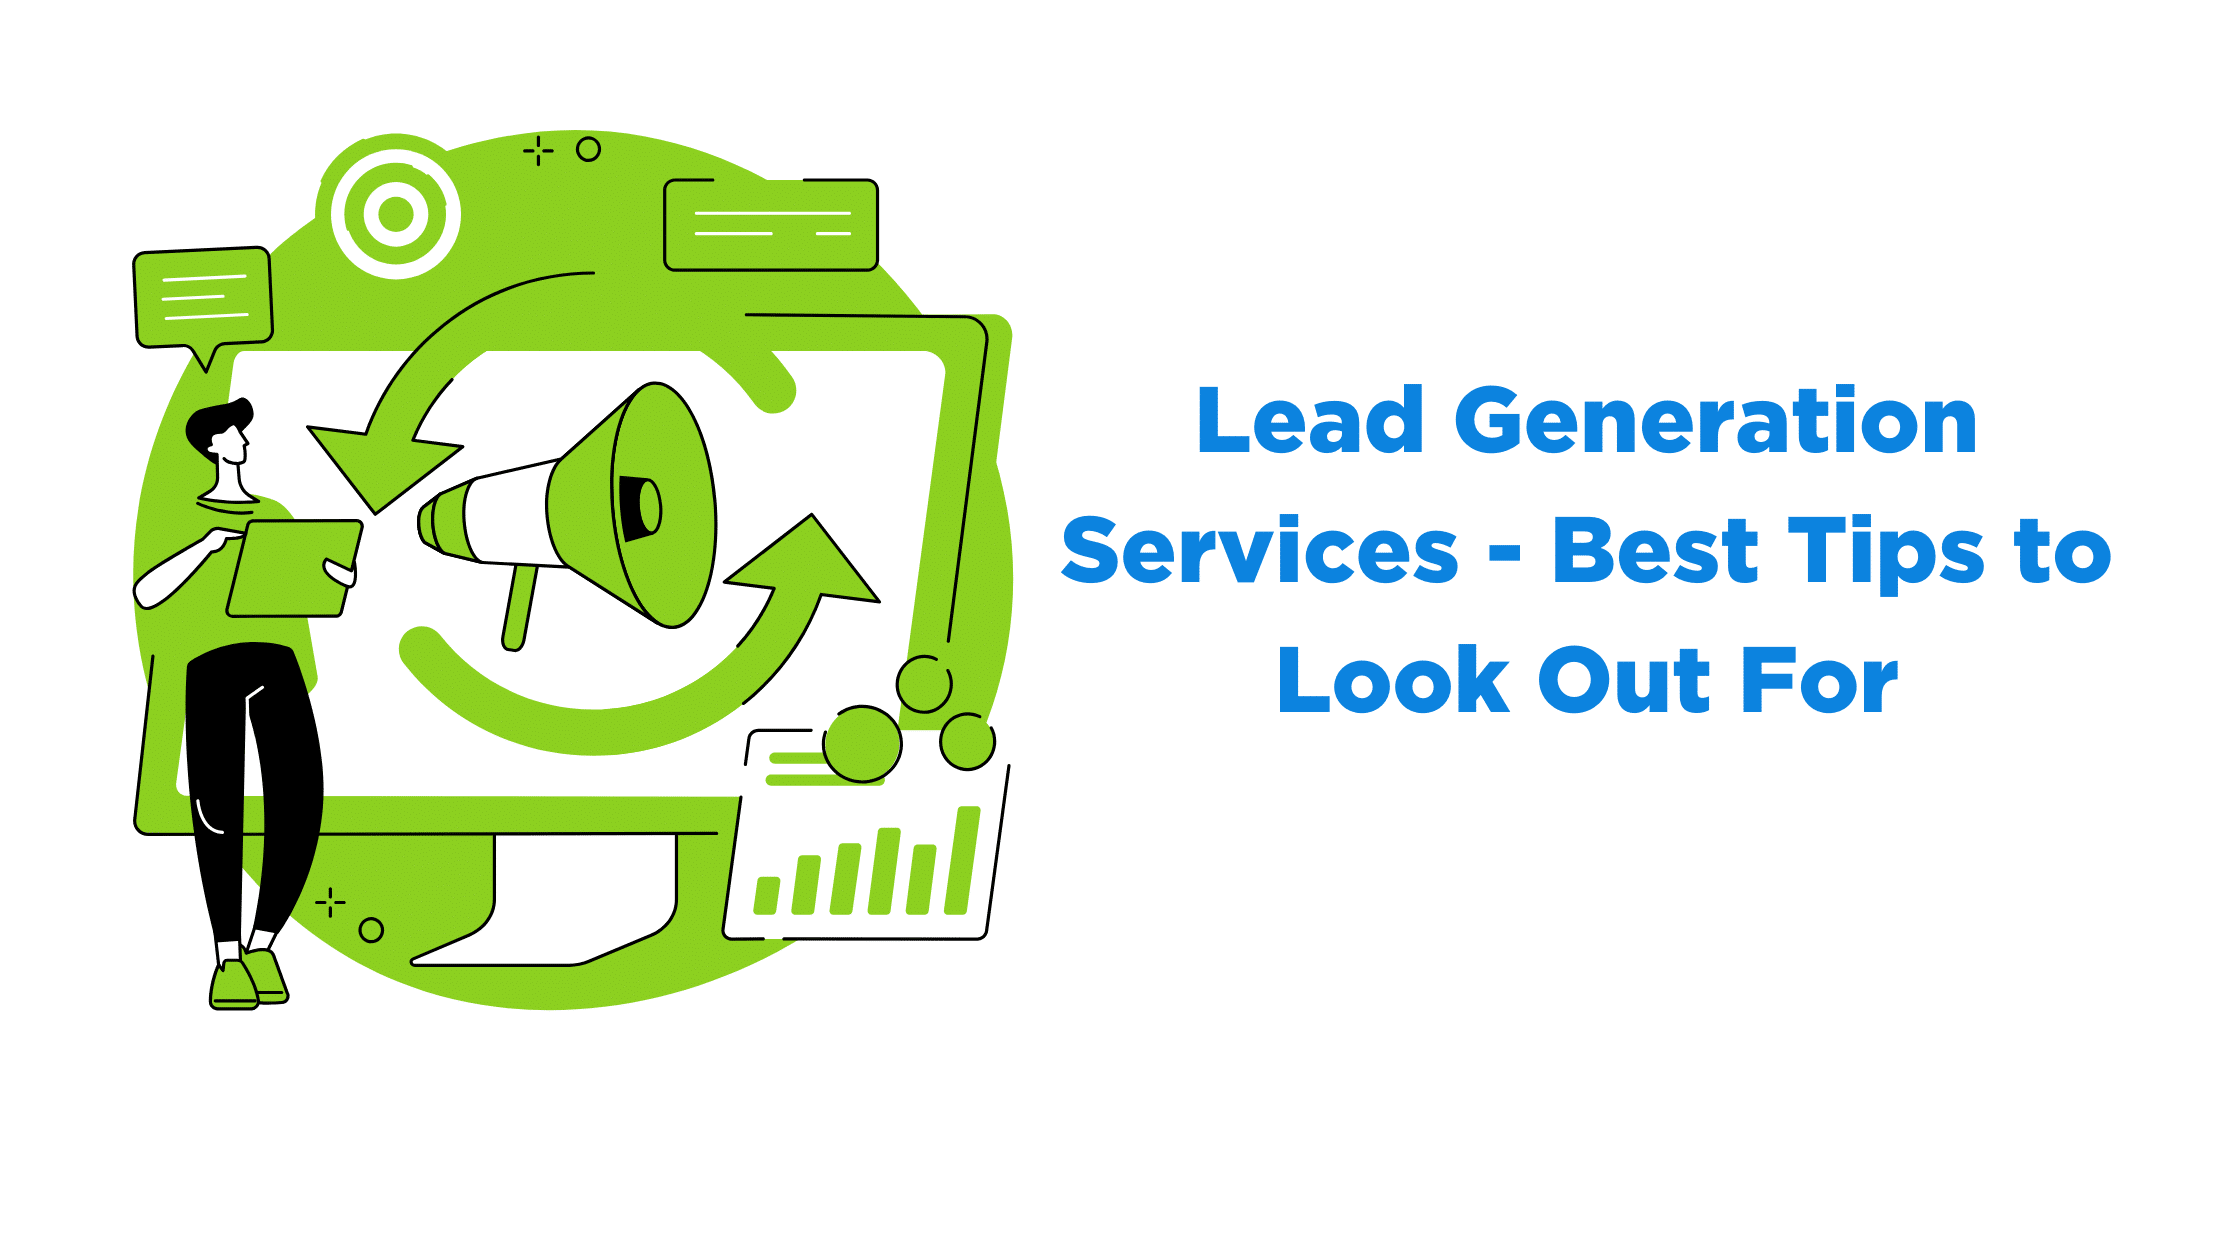 Lead Generation Services - 6 Best Things to Look Out For